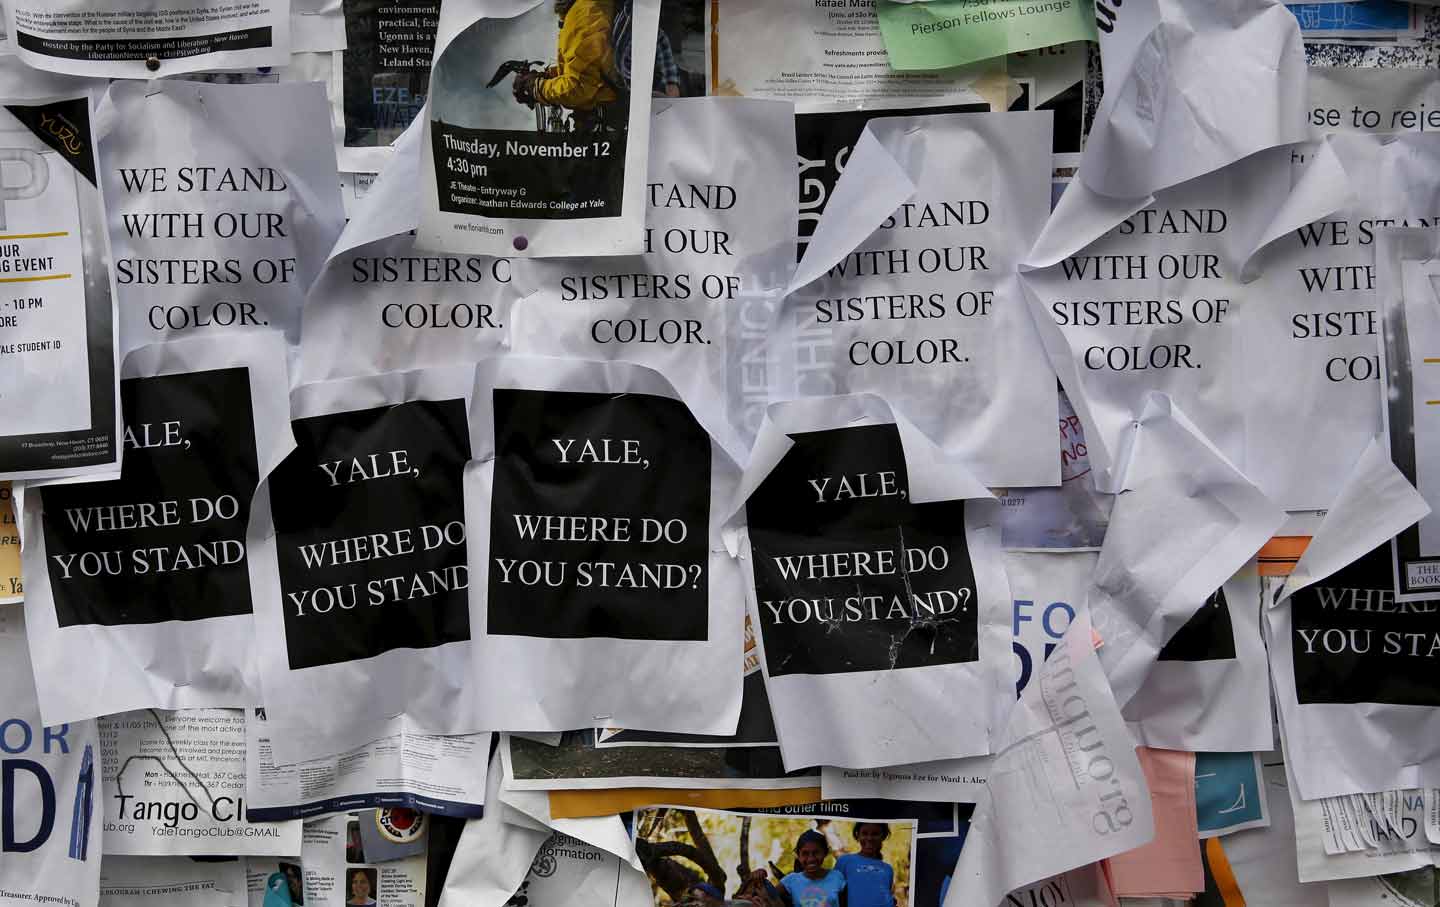 Flyers are seen posted on a college noticeboard on campus at Yale University in New Haven, Connecticut November 12, 2015.